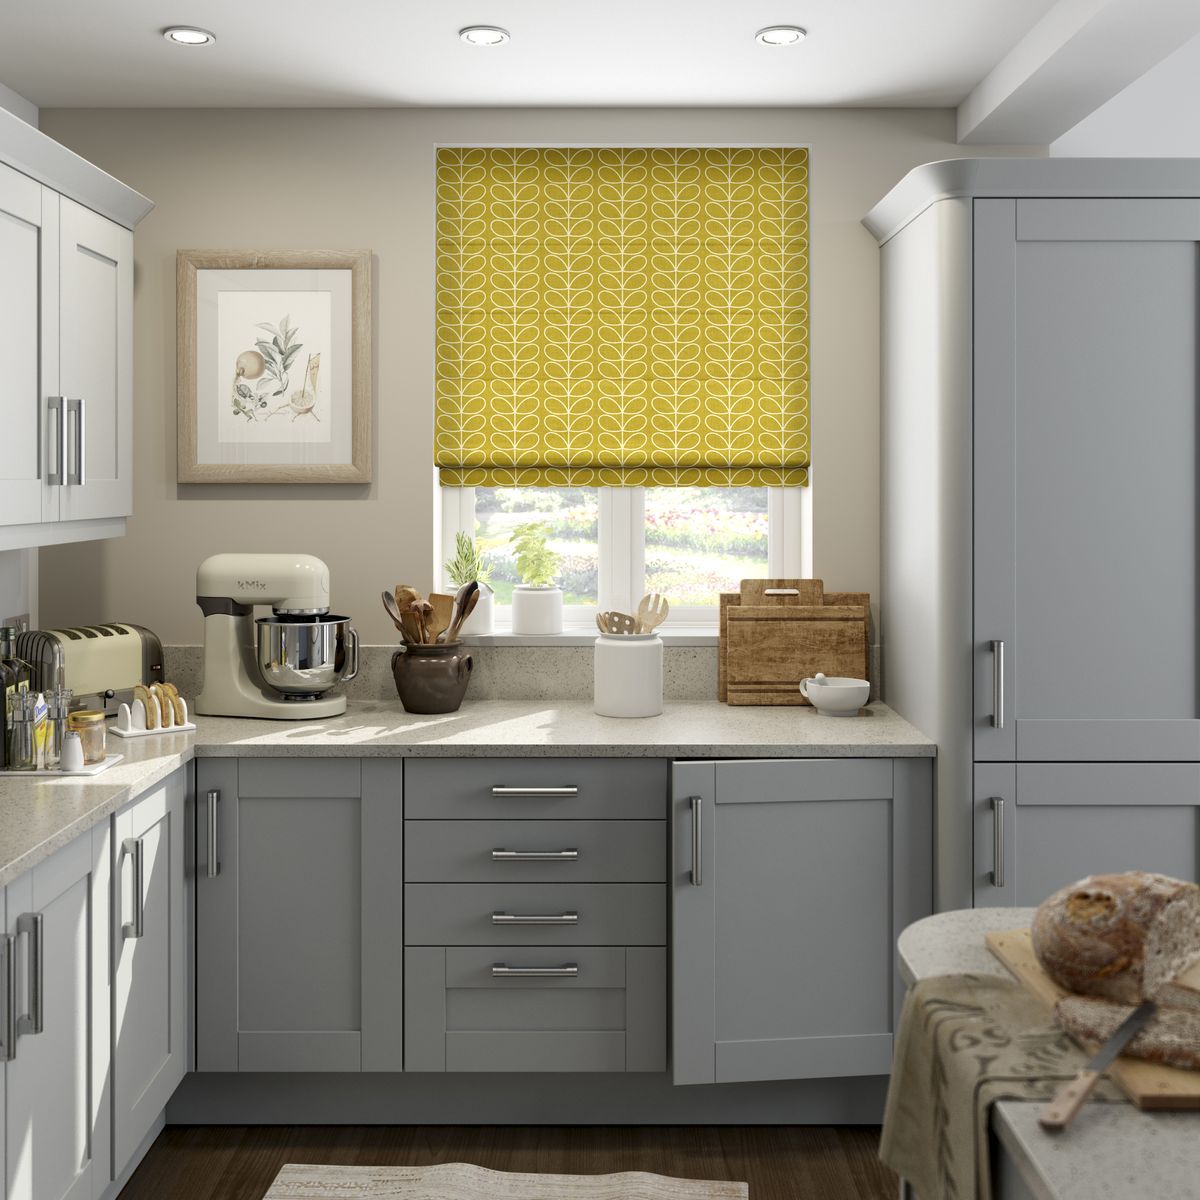 Kitchen Blind Ideas 11 Ways To Stylishly Dress Your Windows Real Homes